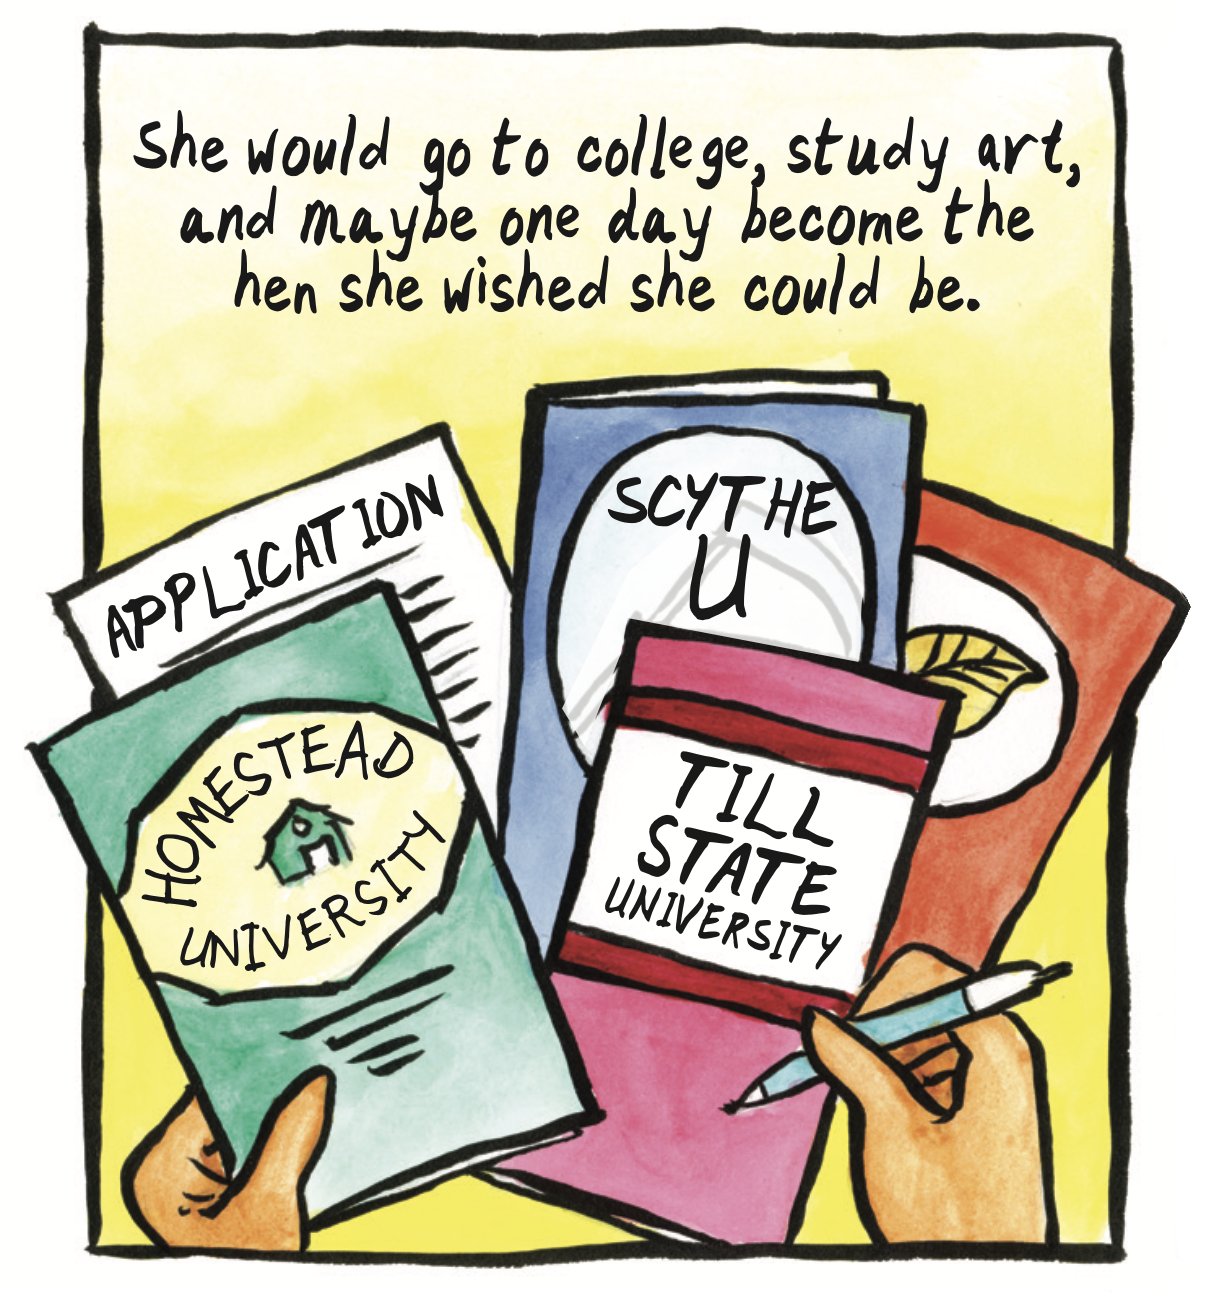 â€œShe would go to college, study art, and maybe one day become the hen she wishes she could be.â€ A spread of college brochures and applications: Homestead University, Scythe U, Till State University. 